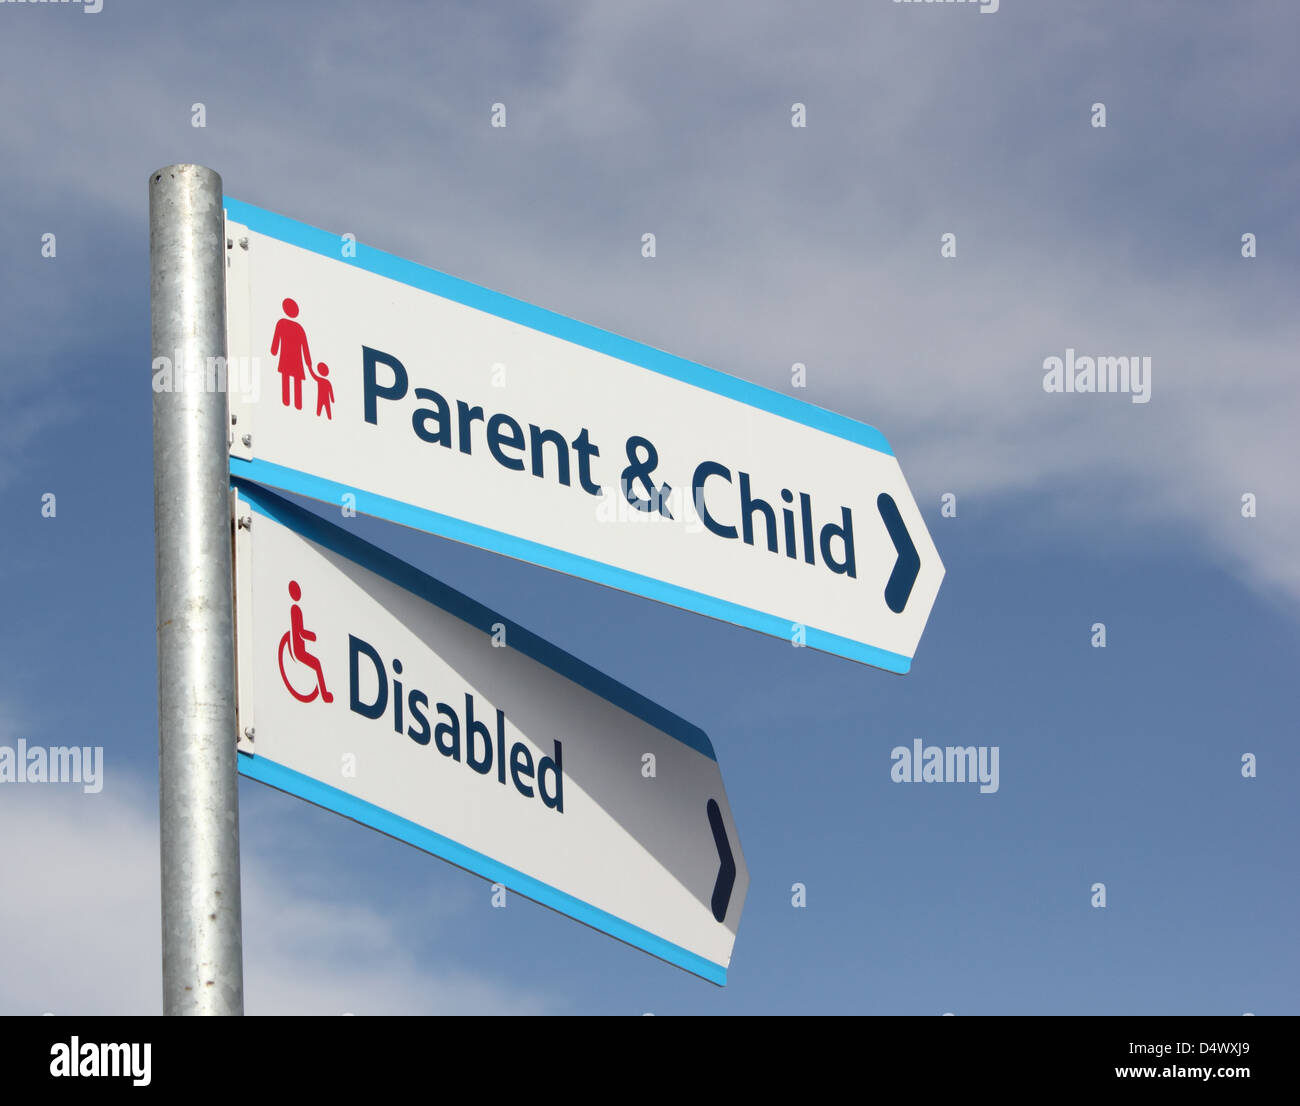 disabled and parent & child parking signs Stock Photo